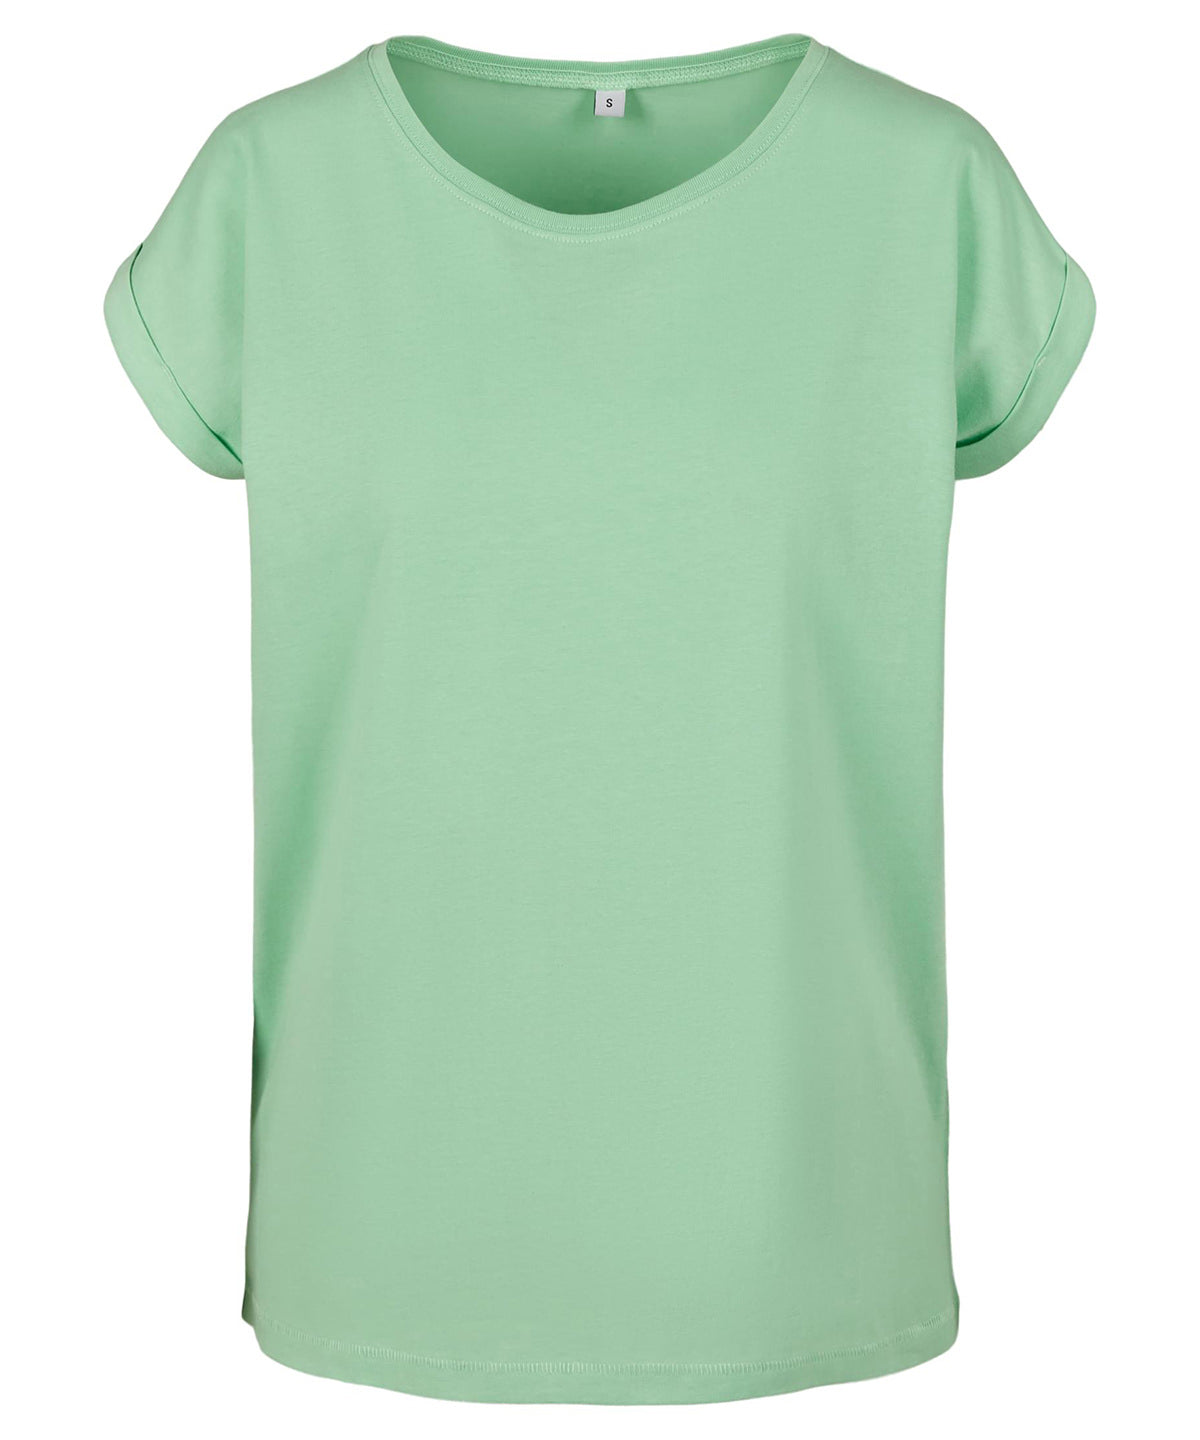 Personalised T-Shirts - Light Green Build Your Brand Women's extended shoulder tee